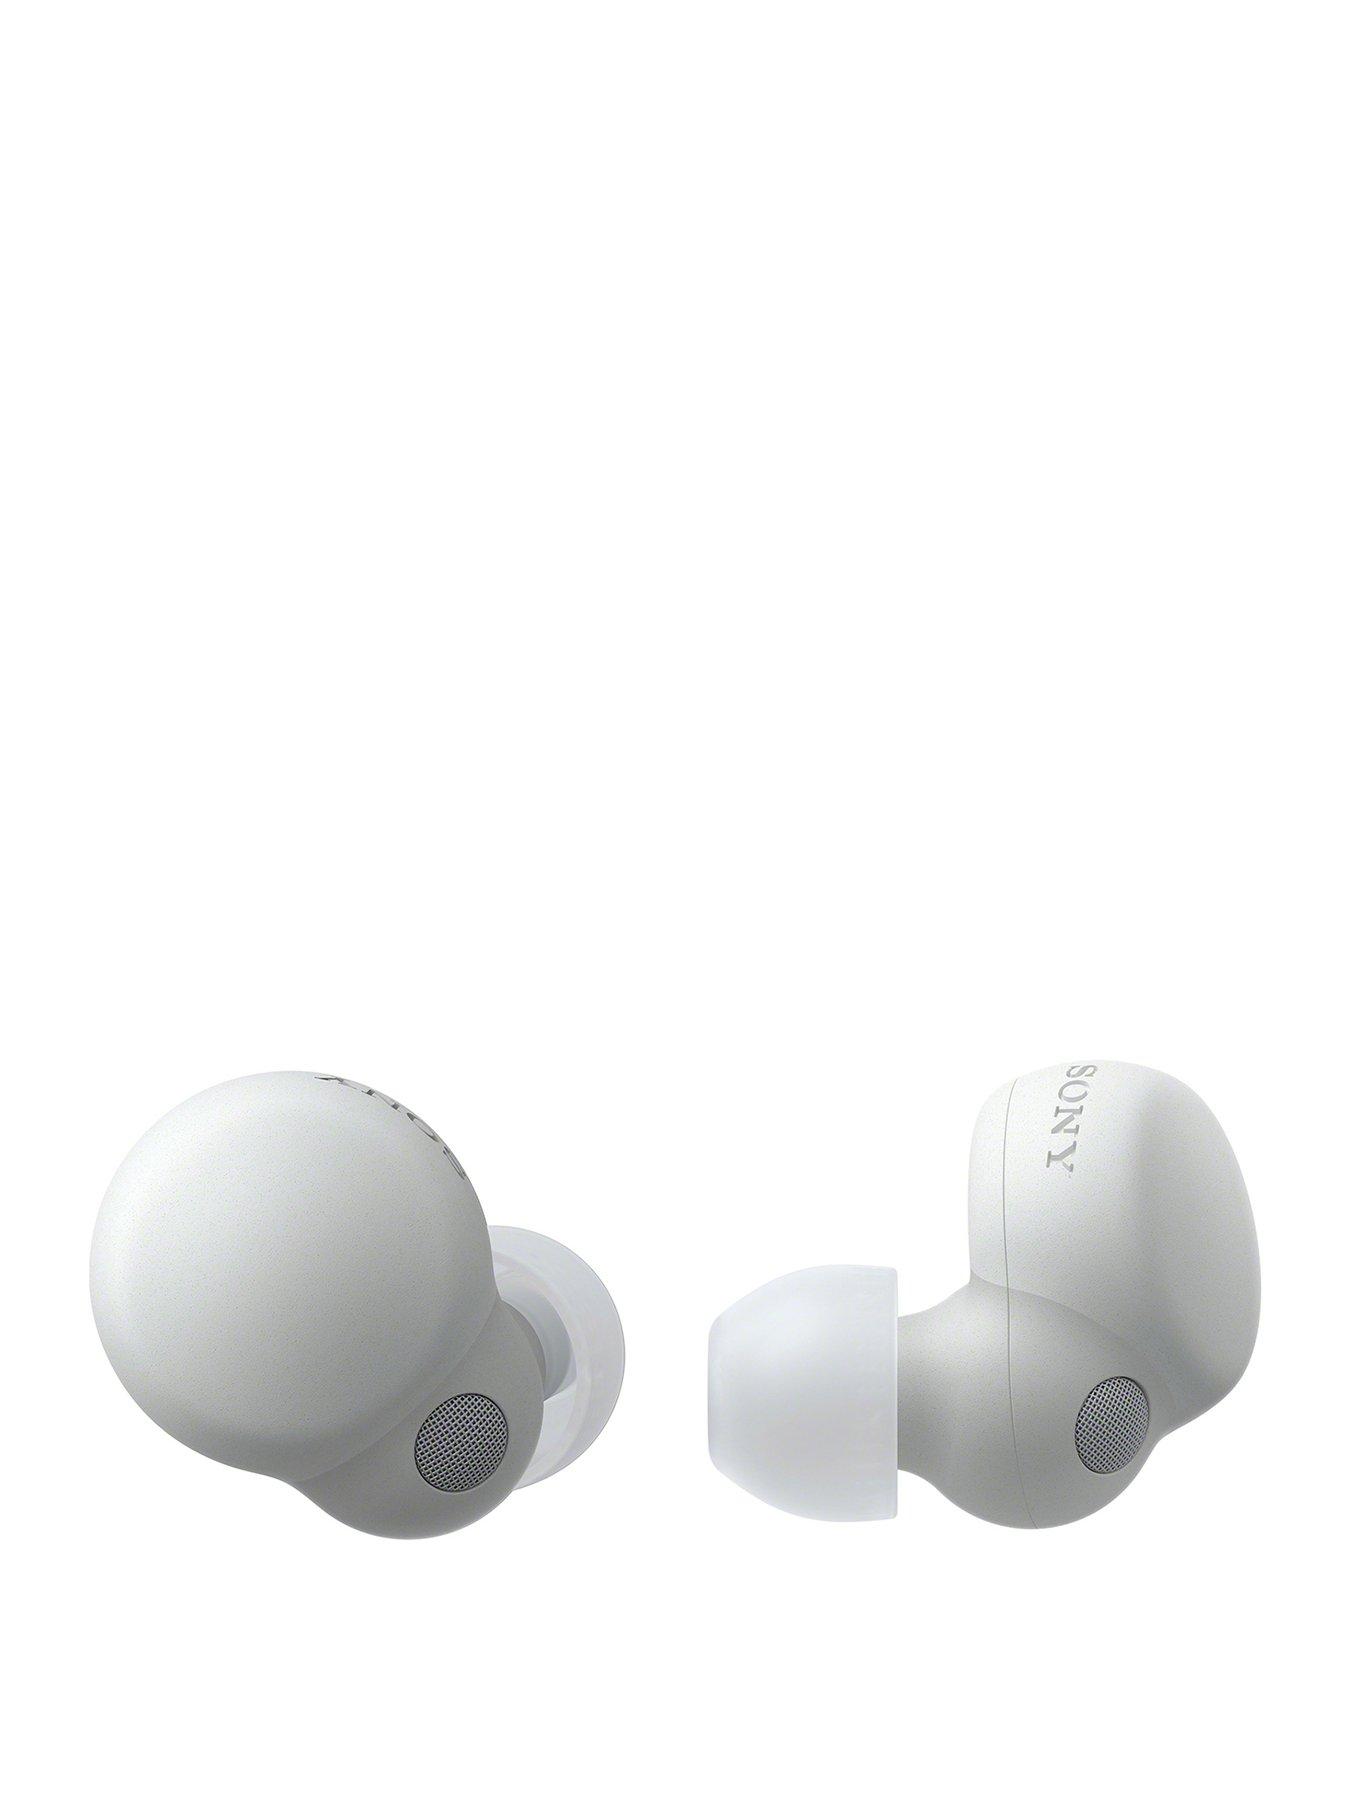 SONY WF-C700N True Wireless TWS Bluetooth 5.2 Noise Canceling IPX4 Earphone  for Apple iOS iPhone Android